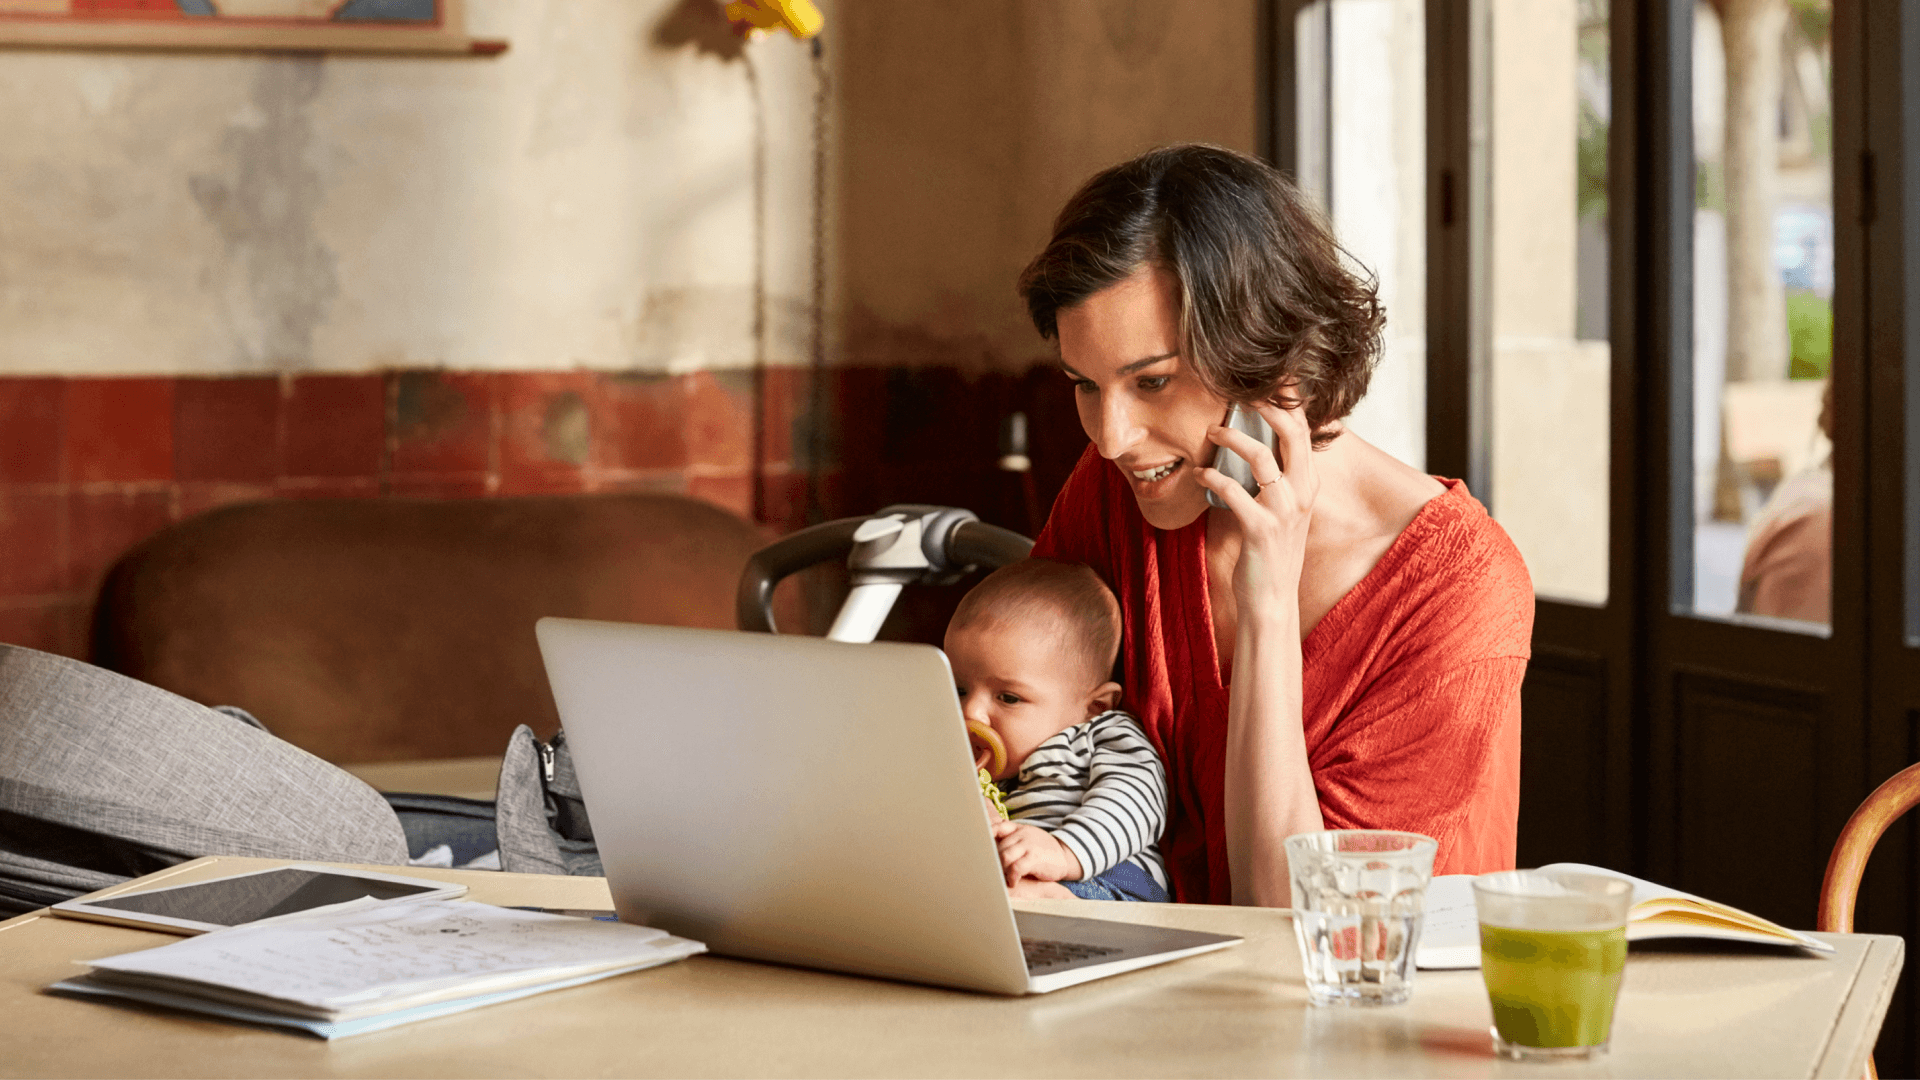 Image of a young woman with a baby in her lap talking on the phone and looking at a laptop.